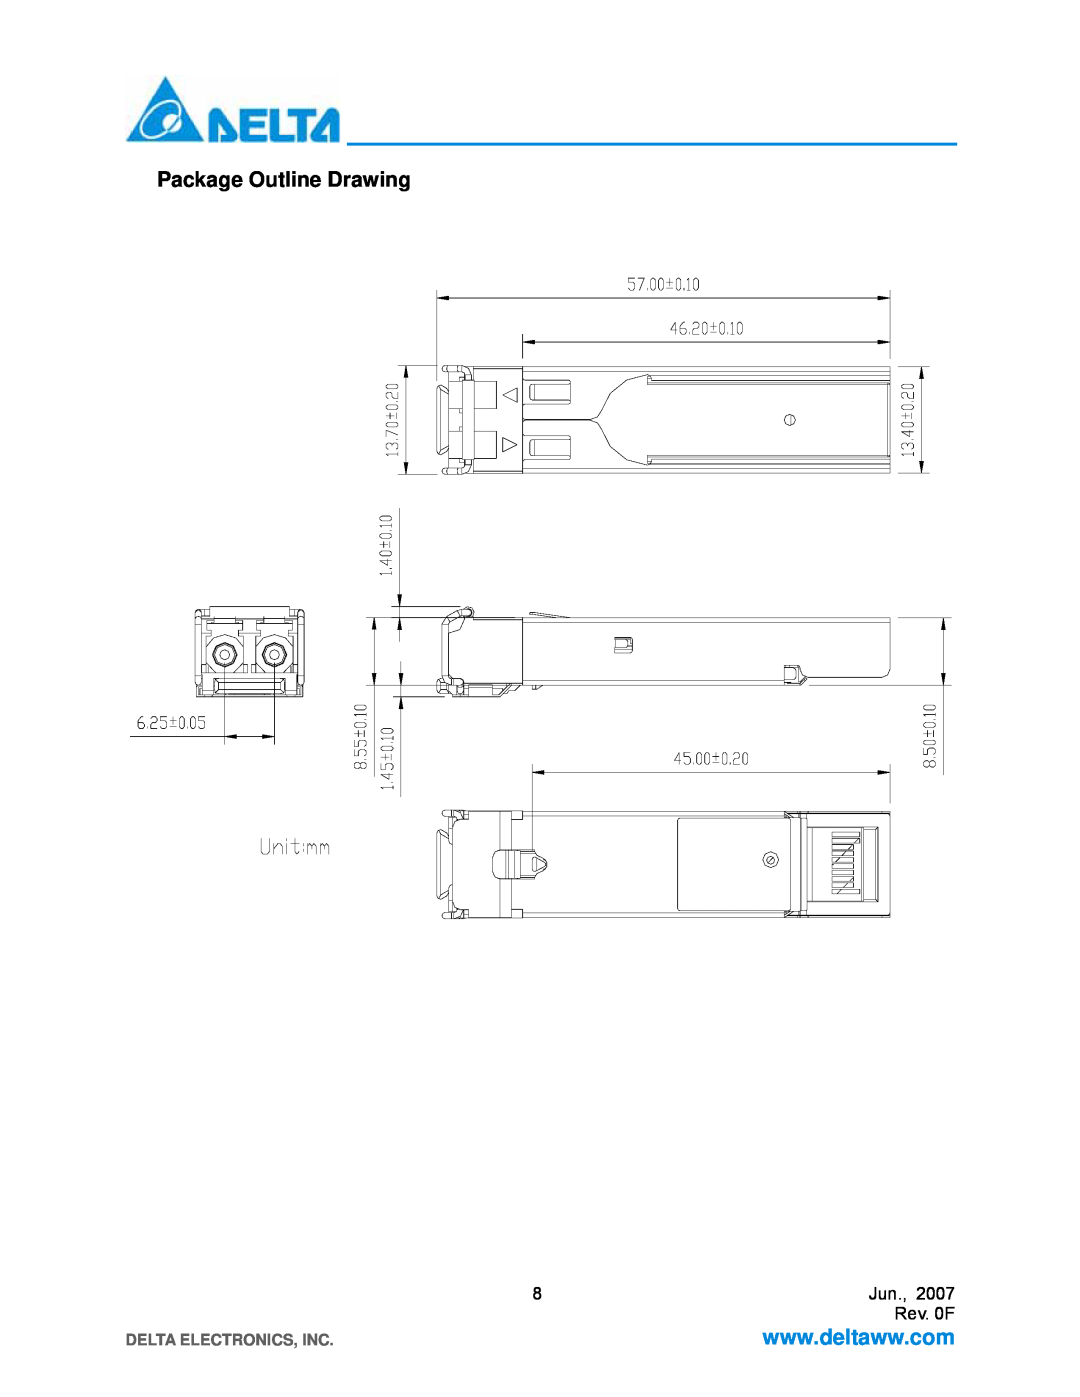 Delta Electronics LCP-155 CWDM manual Package Outline Drawing, Rev. 0F, Delta Electronics, Inc 